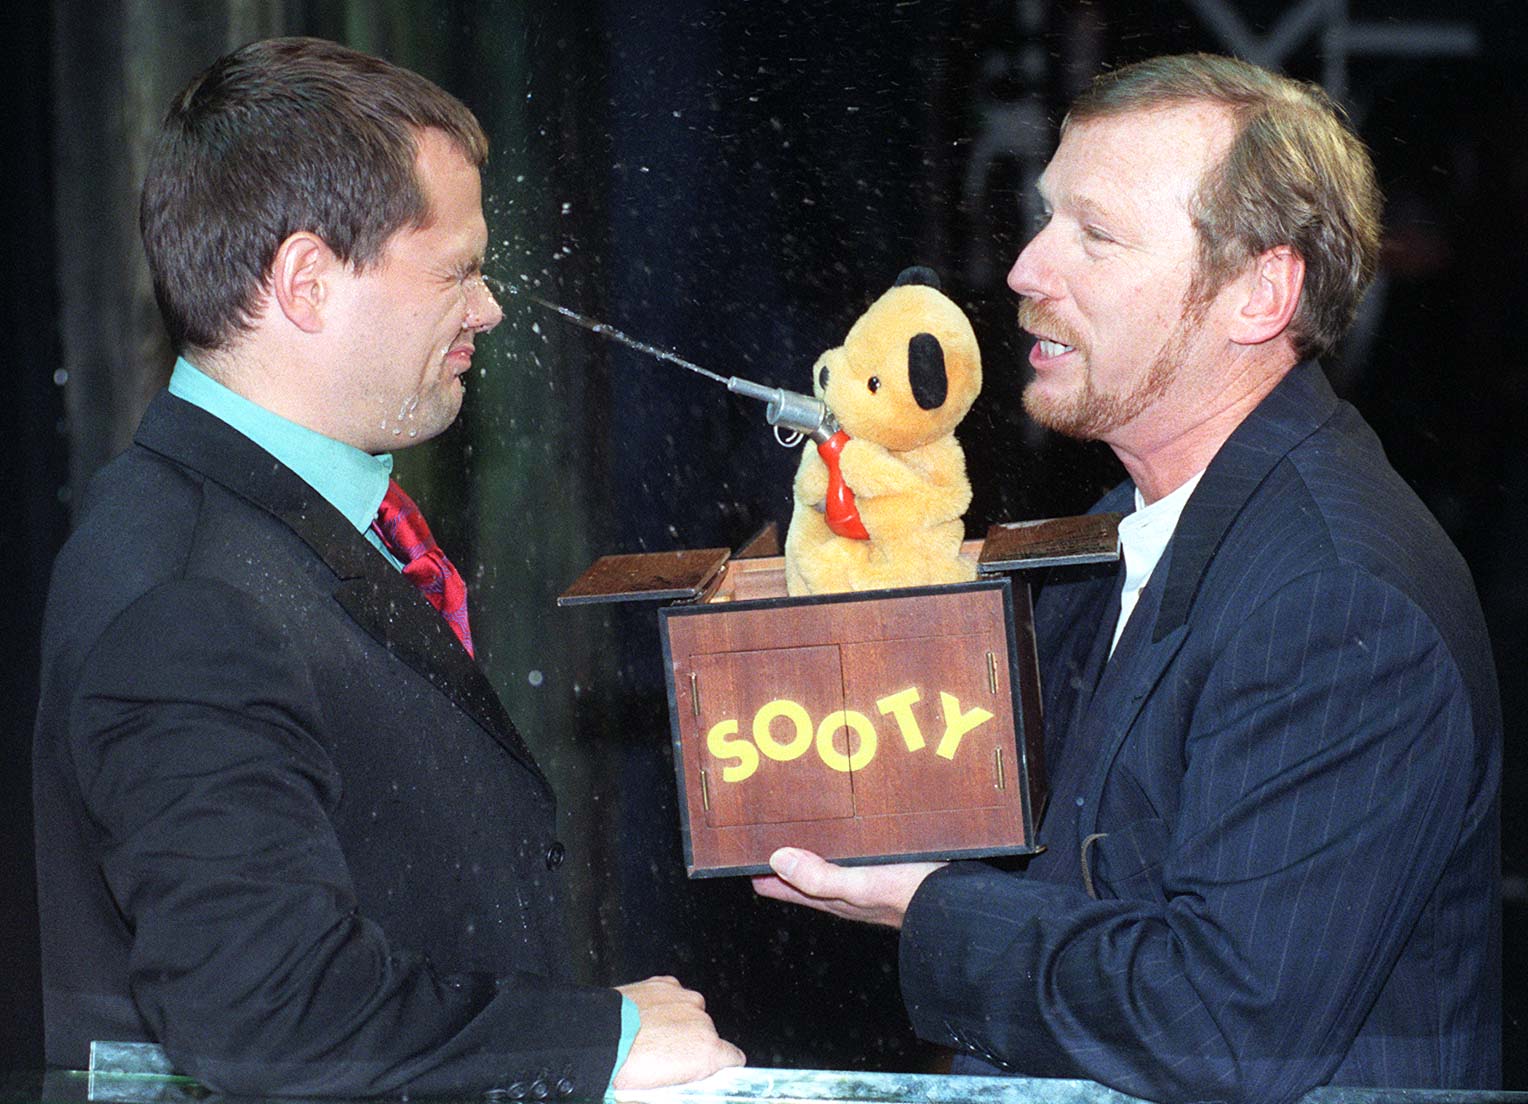 Comedian Jack Dee is squirted in the face by Sooty and puppeteer Matthew Corbett